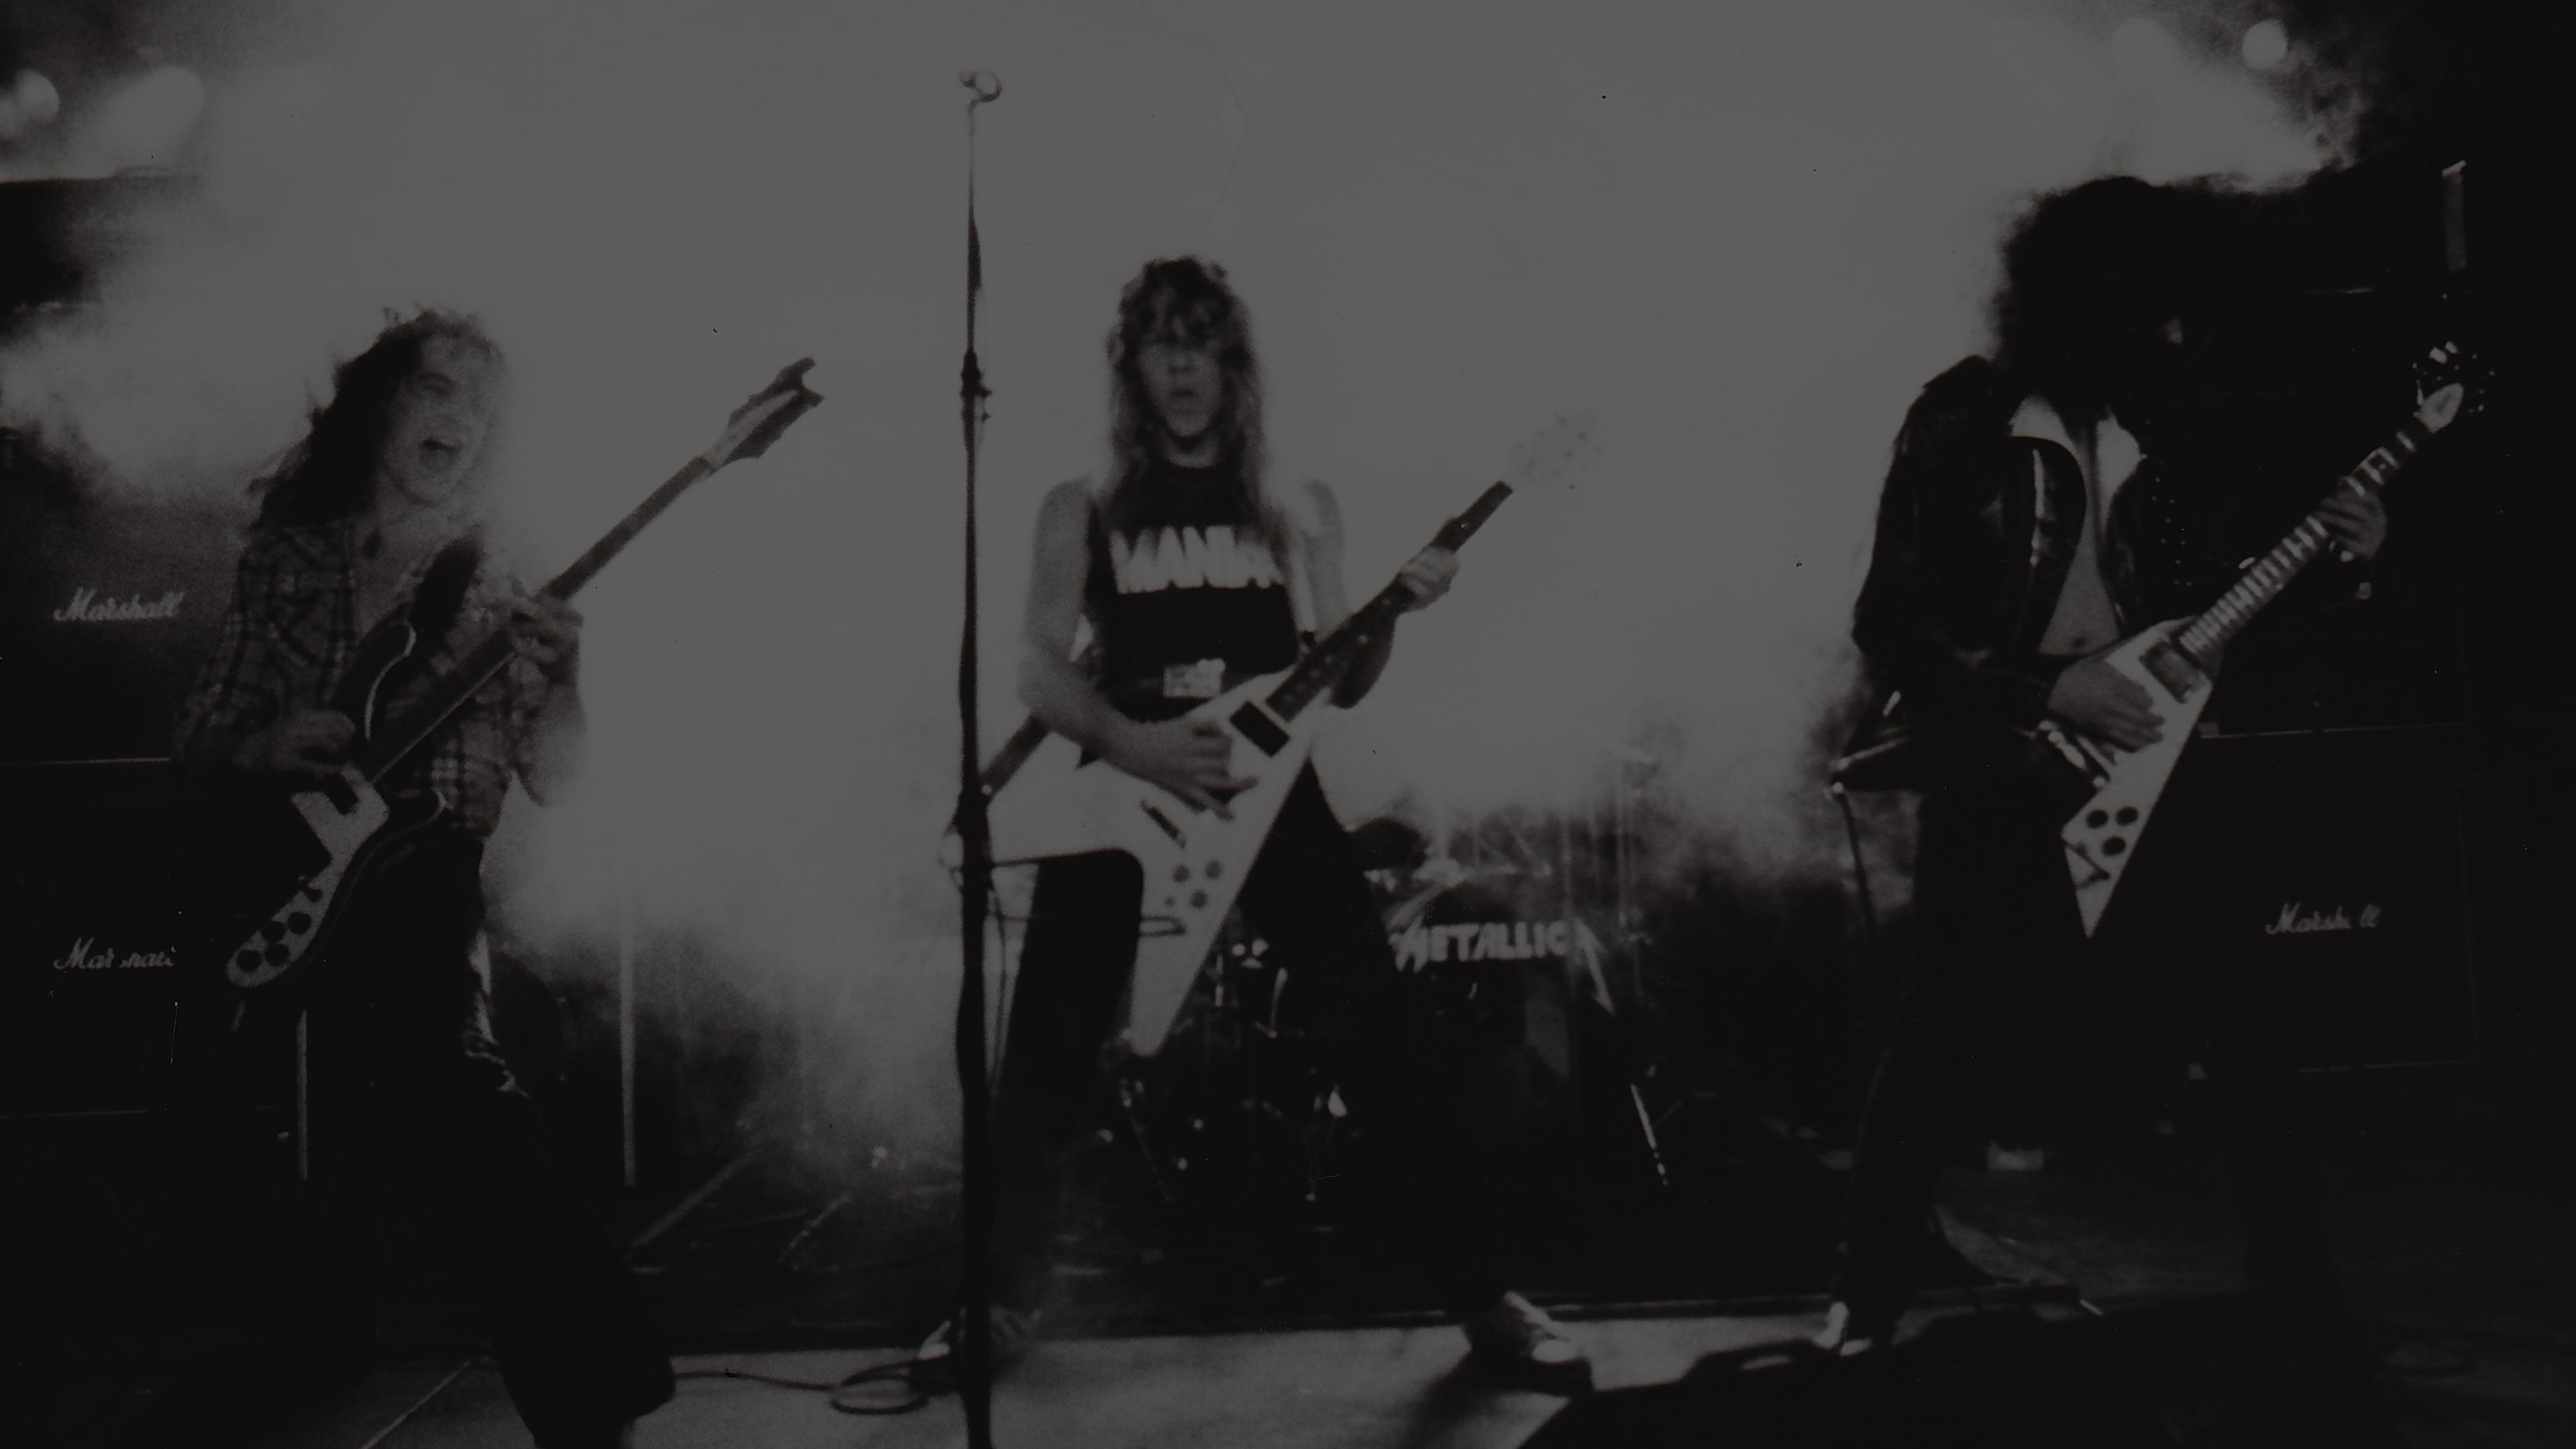 Metallica at Paramount Theater in Staten Island, NY on April 24, 1983